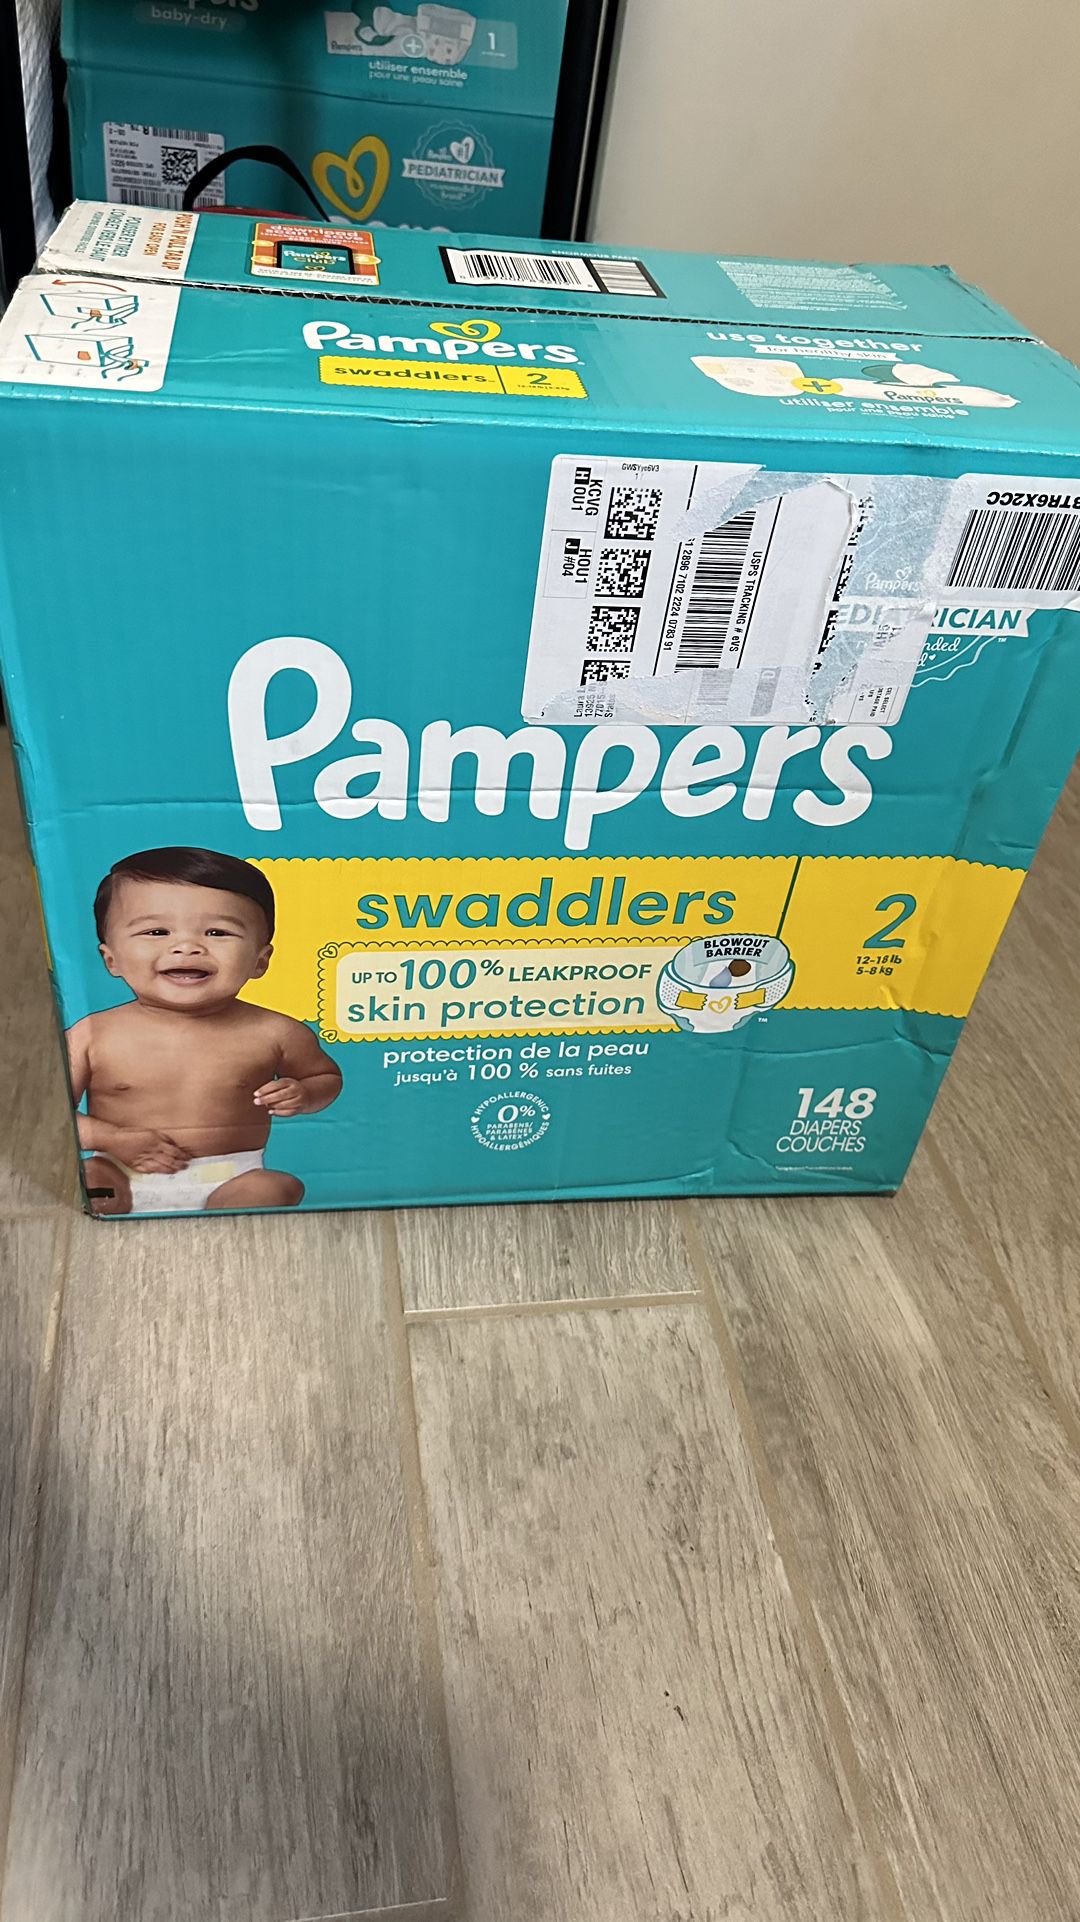 Pampers Swaddlers Diaper Size 2 148 Count